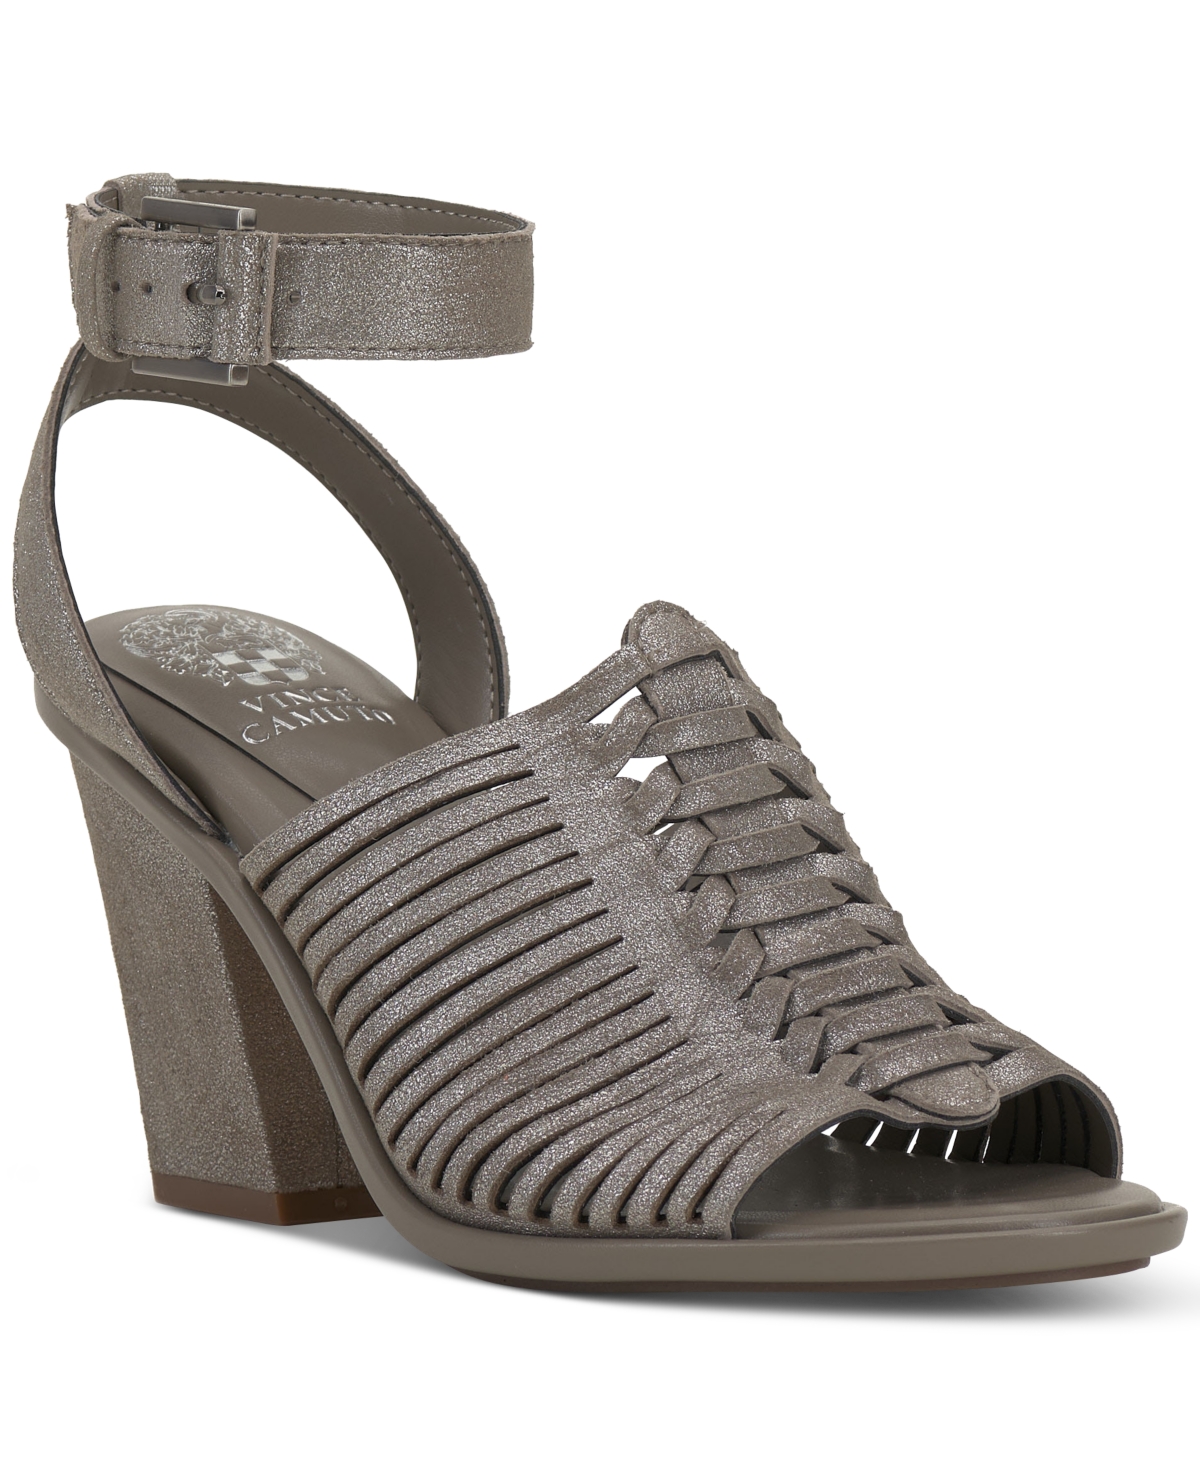 VINCE CAMUTO FRENELA ANKLE-STRAP WOVEN CITY SANDALS